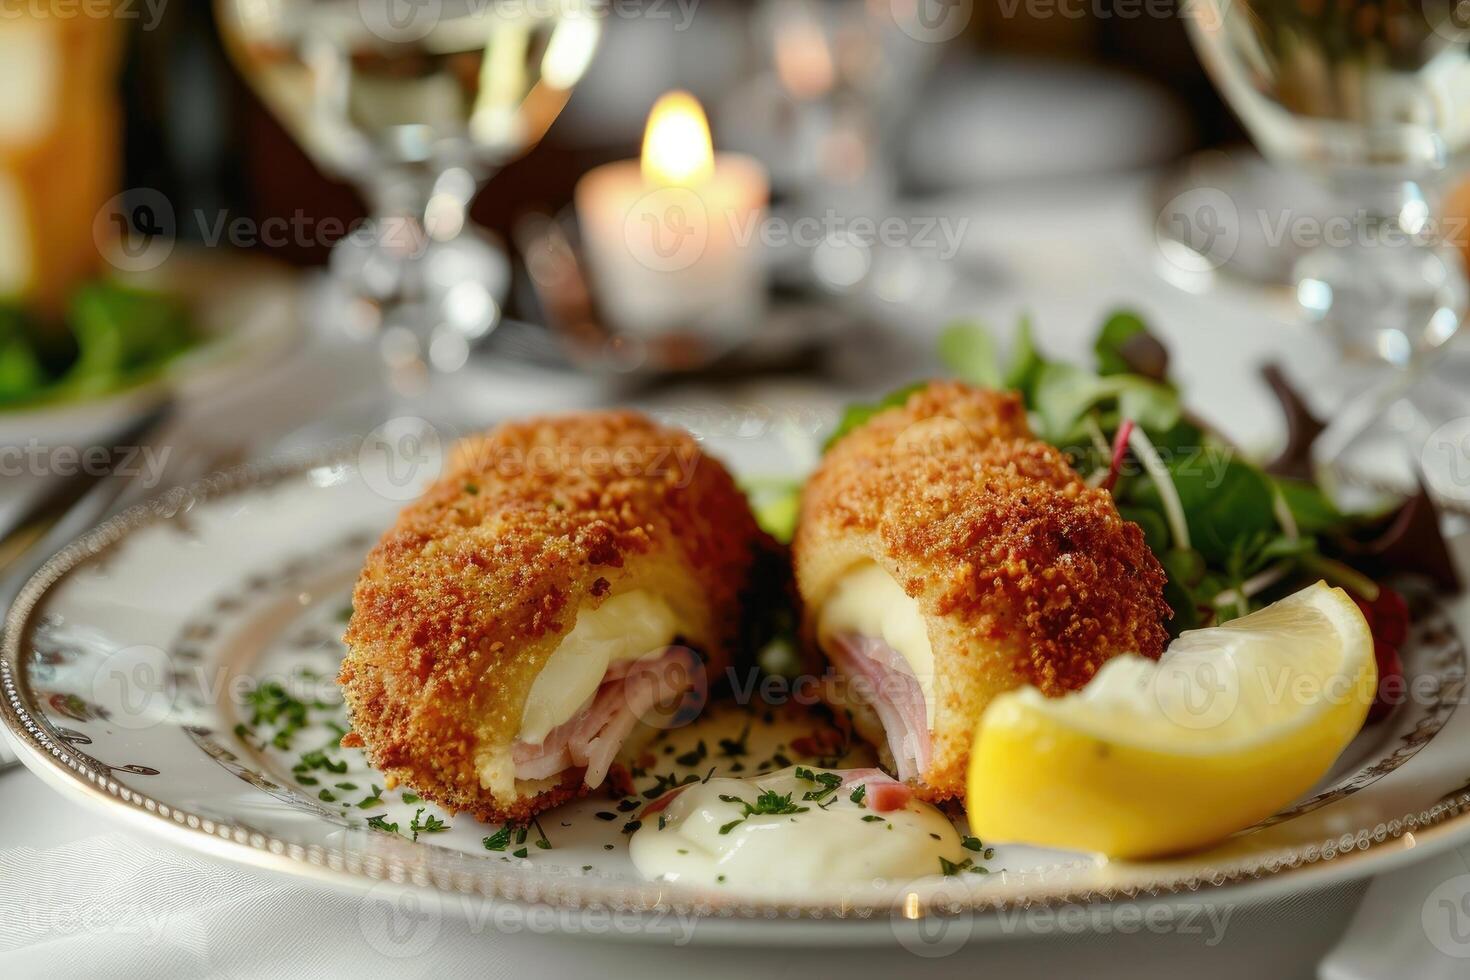 Breaded cutlet stuffed with ham and cheese, sliced in half to reveal the melty interior, on a fine porcelain plate. photo